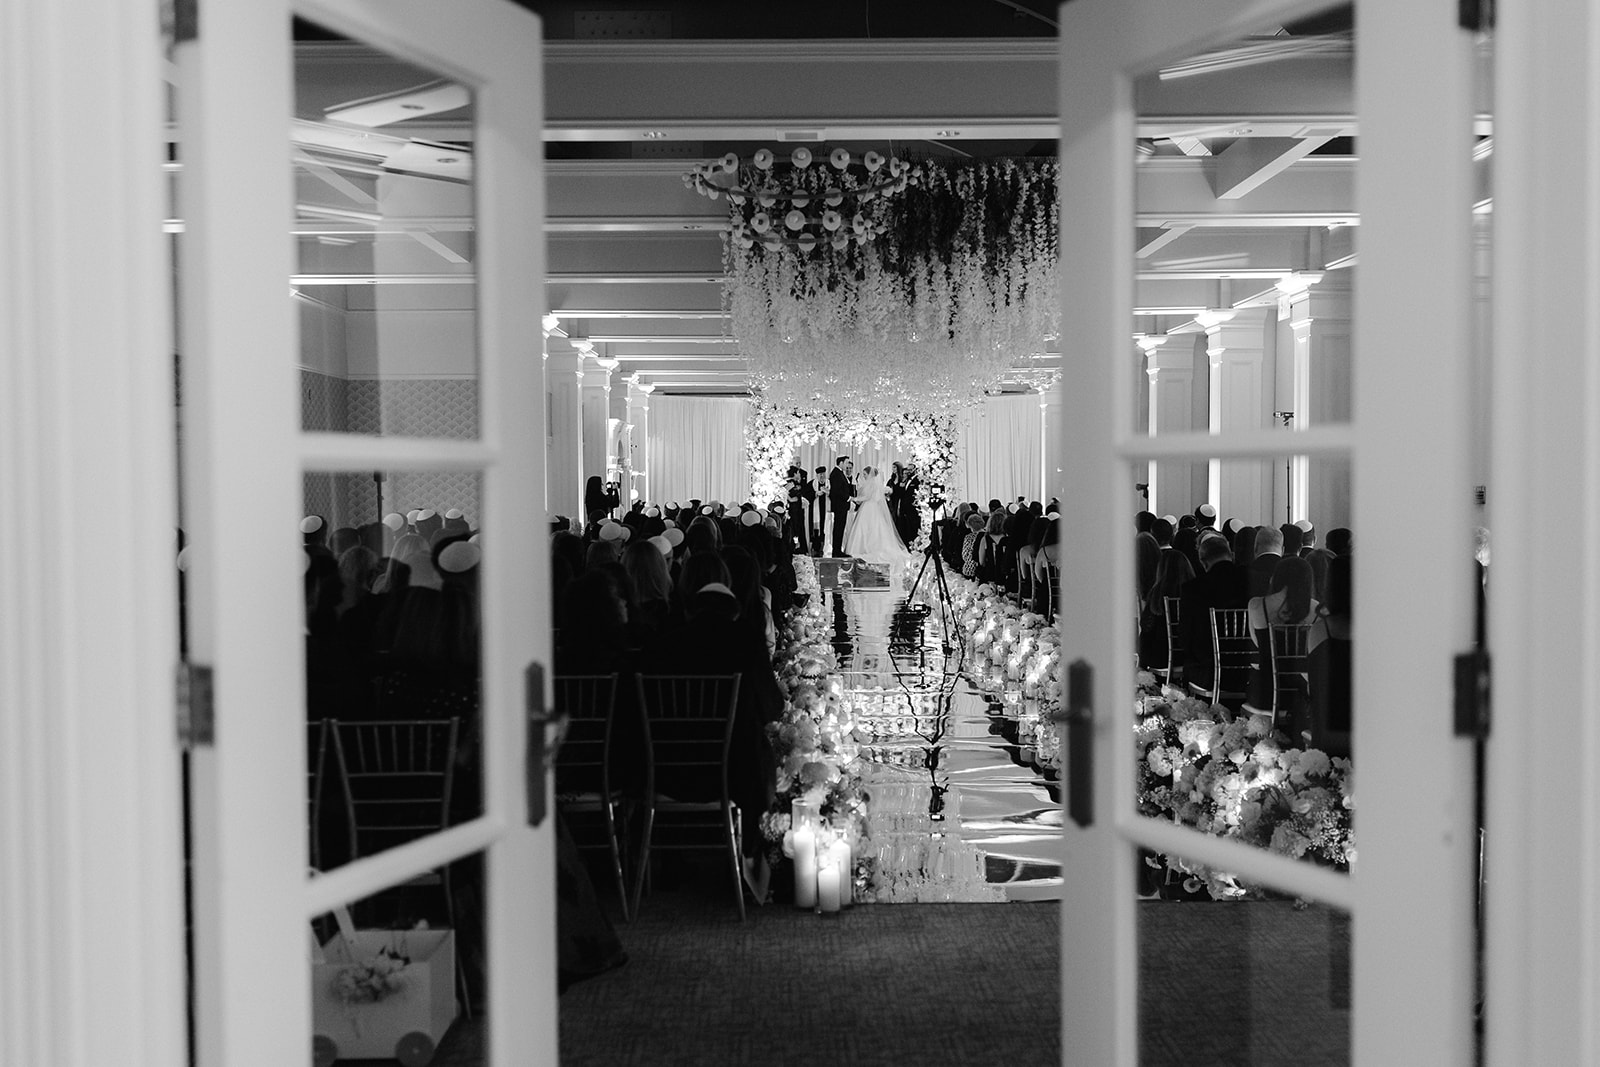 Wide angle view behind semi-closed doors of an indoor wedding ceremony at Pine Hollow Country Club.